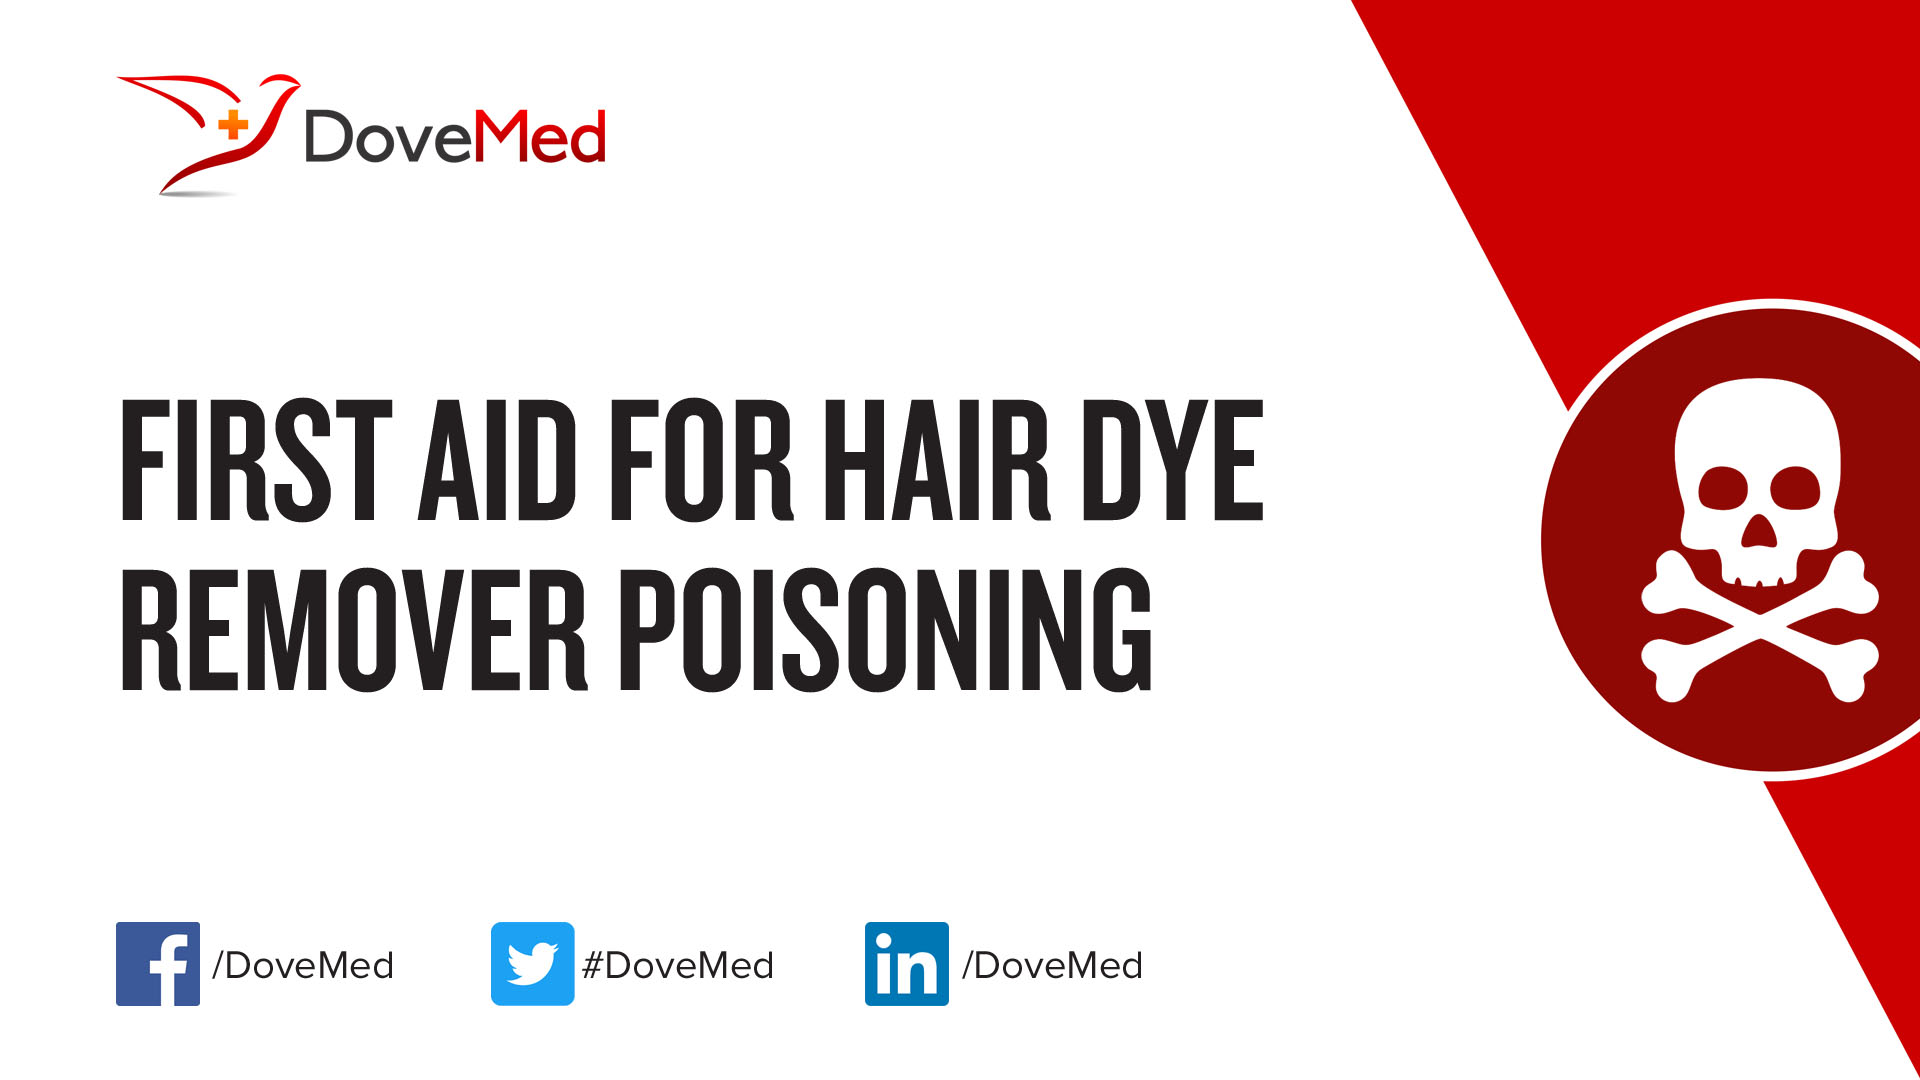 First Aid for Hair Dye Remover Poisoning - DoveMed